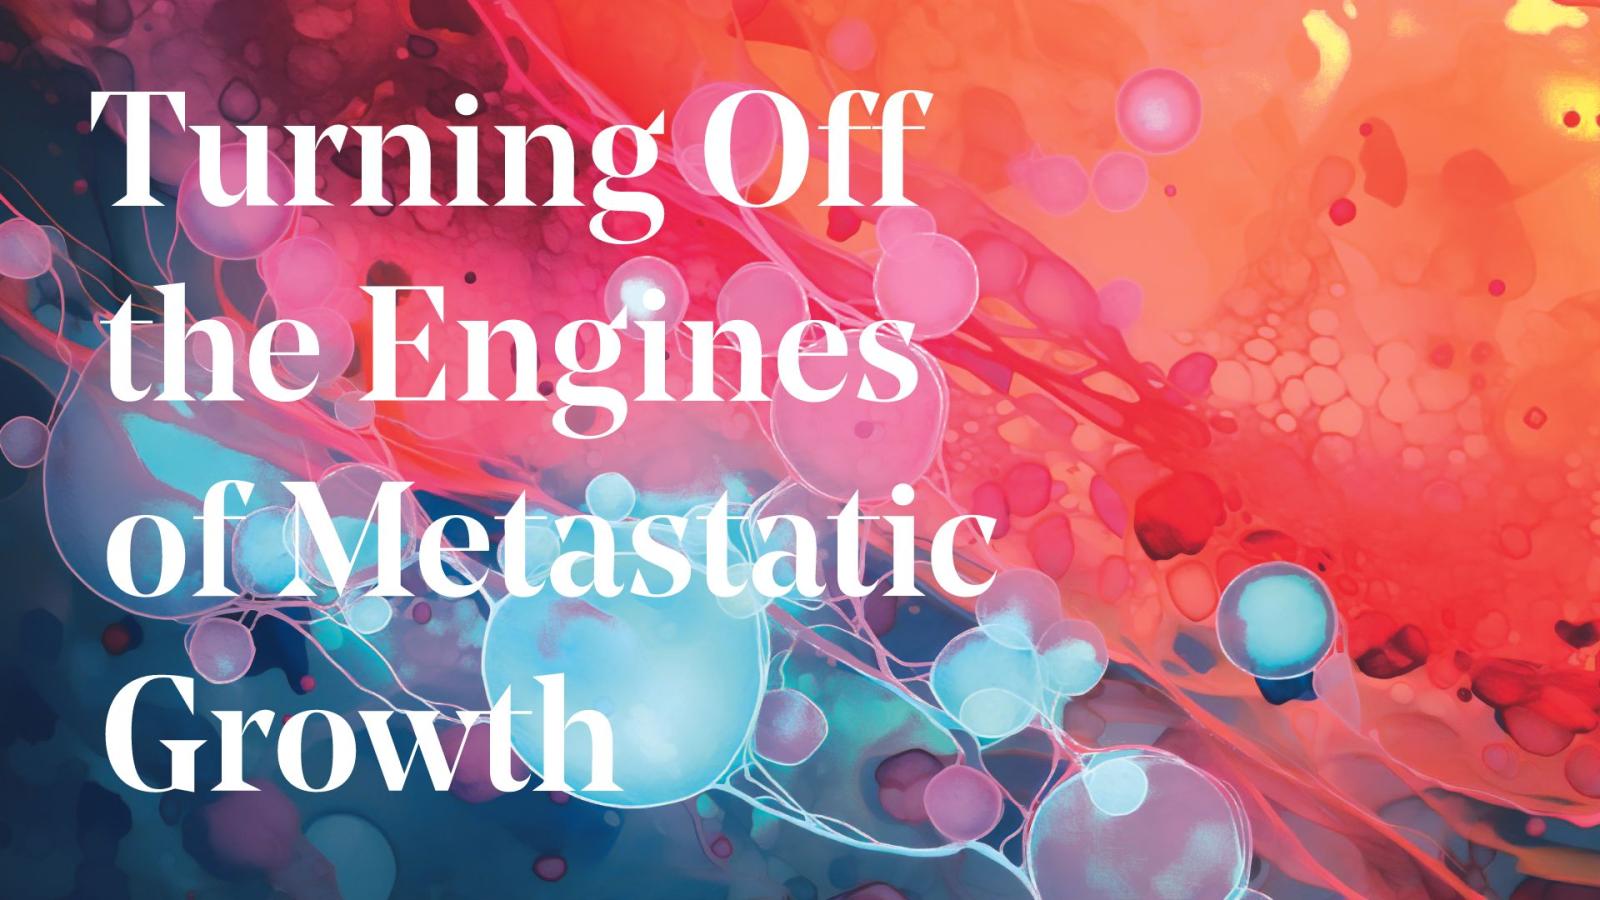 Turning off the Engines of Metastatic Growth